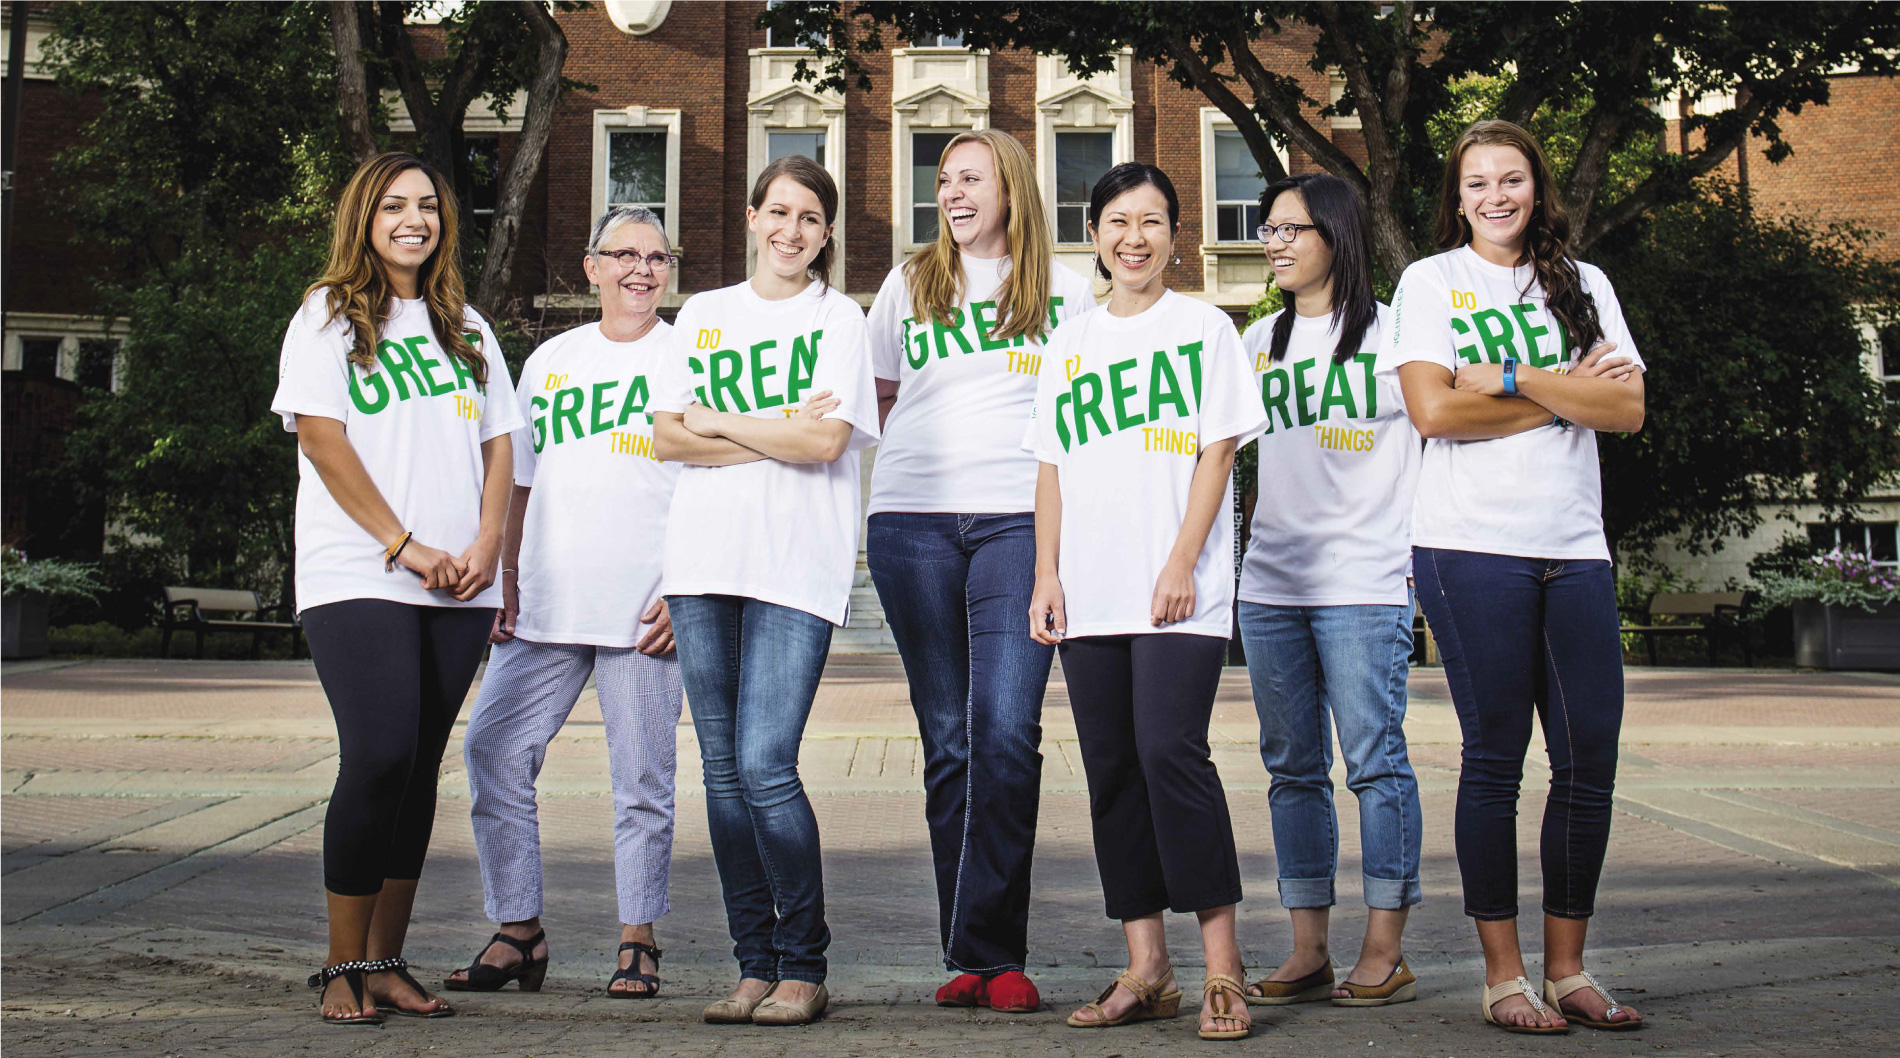 Group of alumni standing in a row wearing Do Great t-shirts